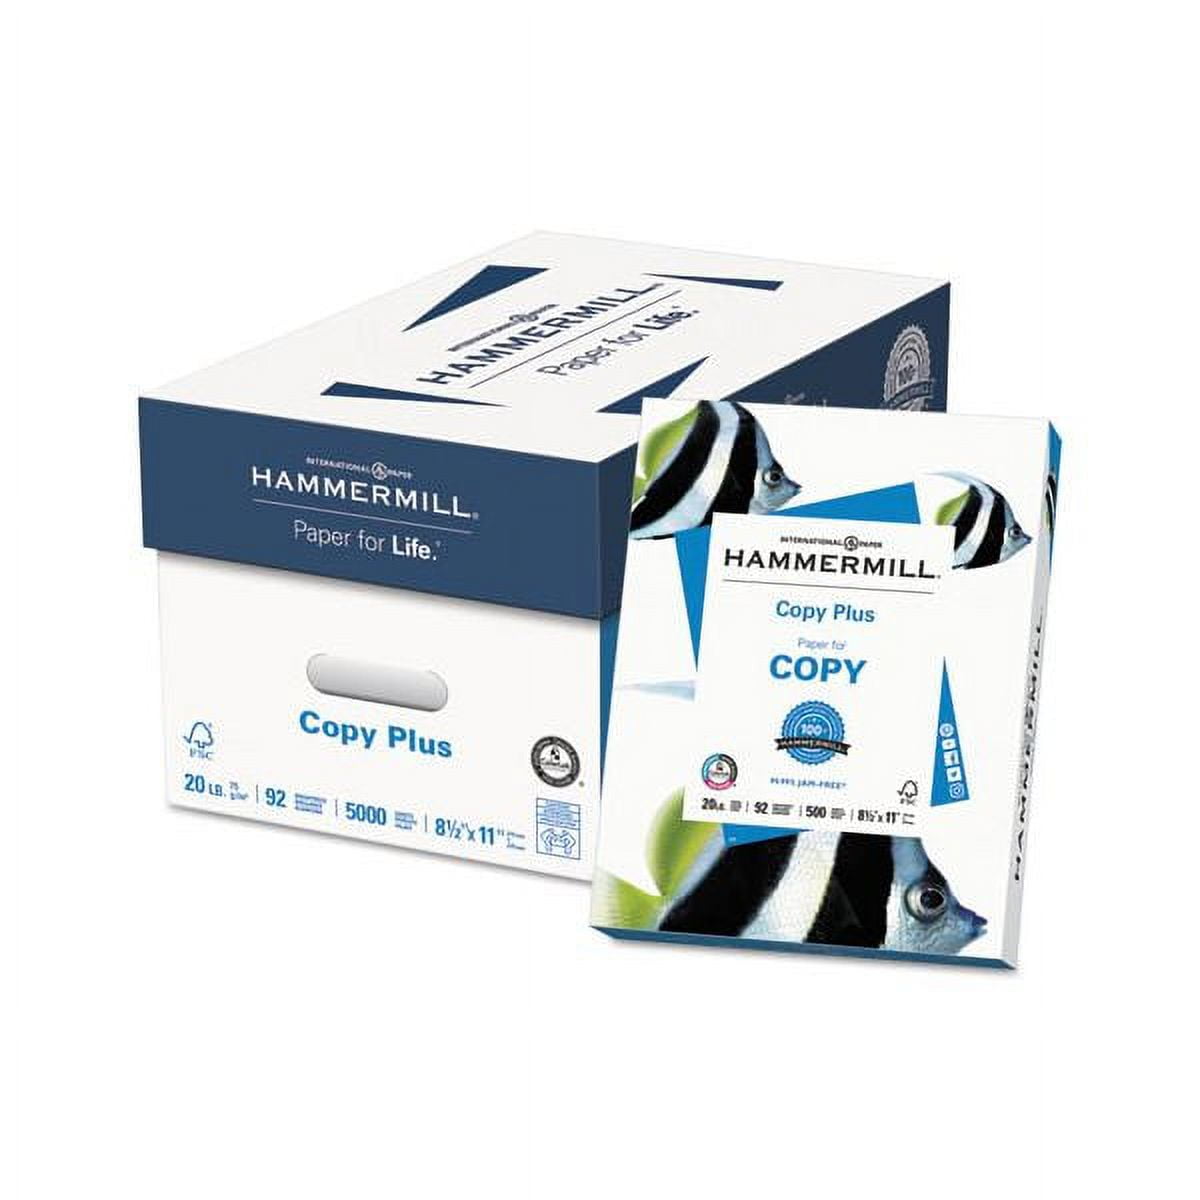 HP Printer Paper, All in One22, 8.5 x 11 Paper, 22lb, 96 Bright, White - 5  Reams / 2,500 Sheets (207000C)